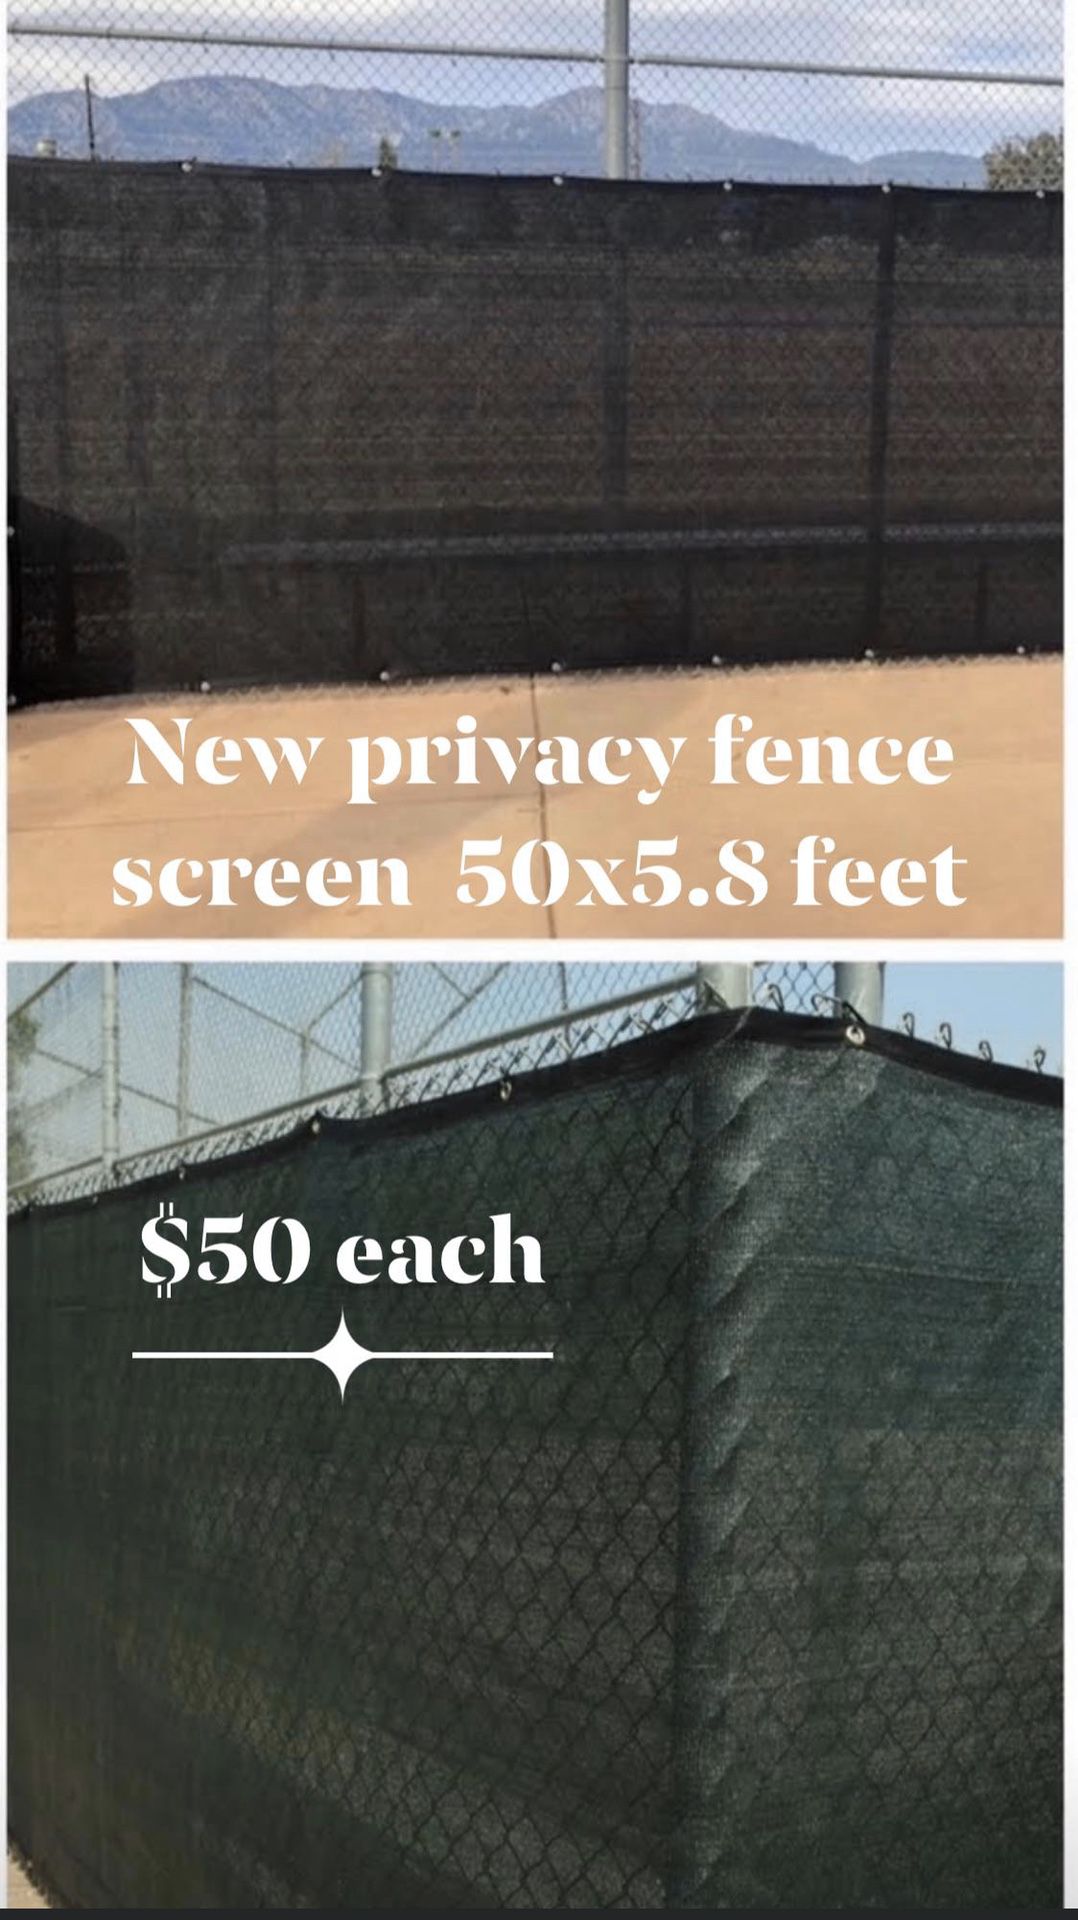 New privacy fence screen 50 feet by 5.8 feet